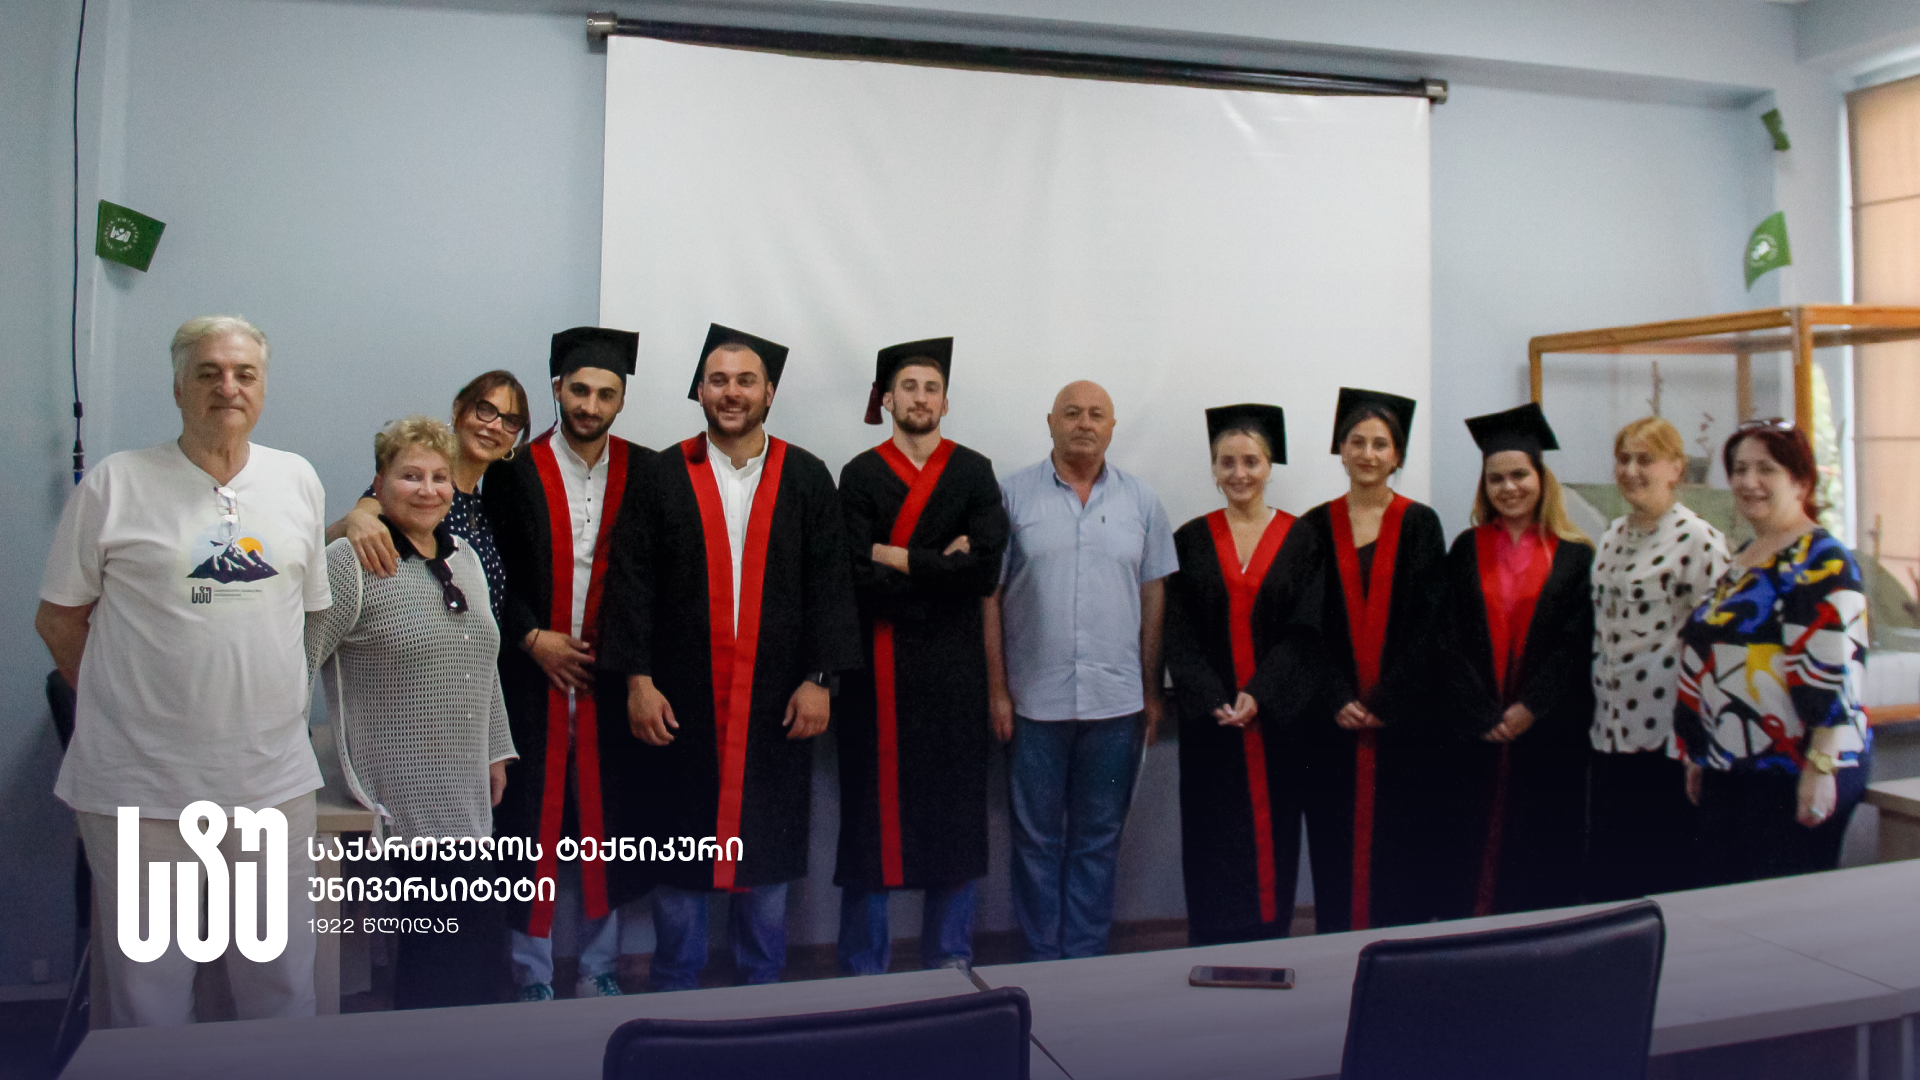 The graduation ceremony of the first batch of graduates was held at the Faculty of Mountain Sustainable Development of GTU 